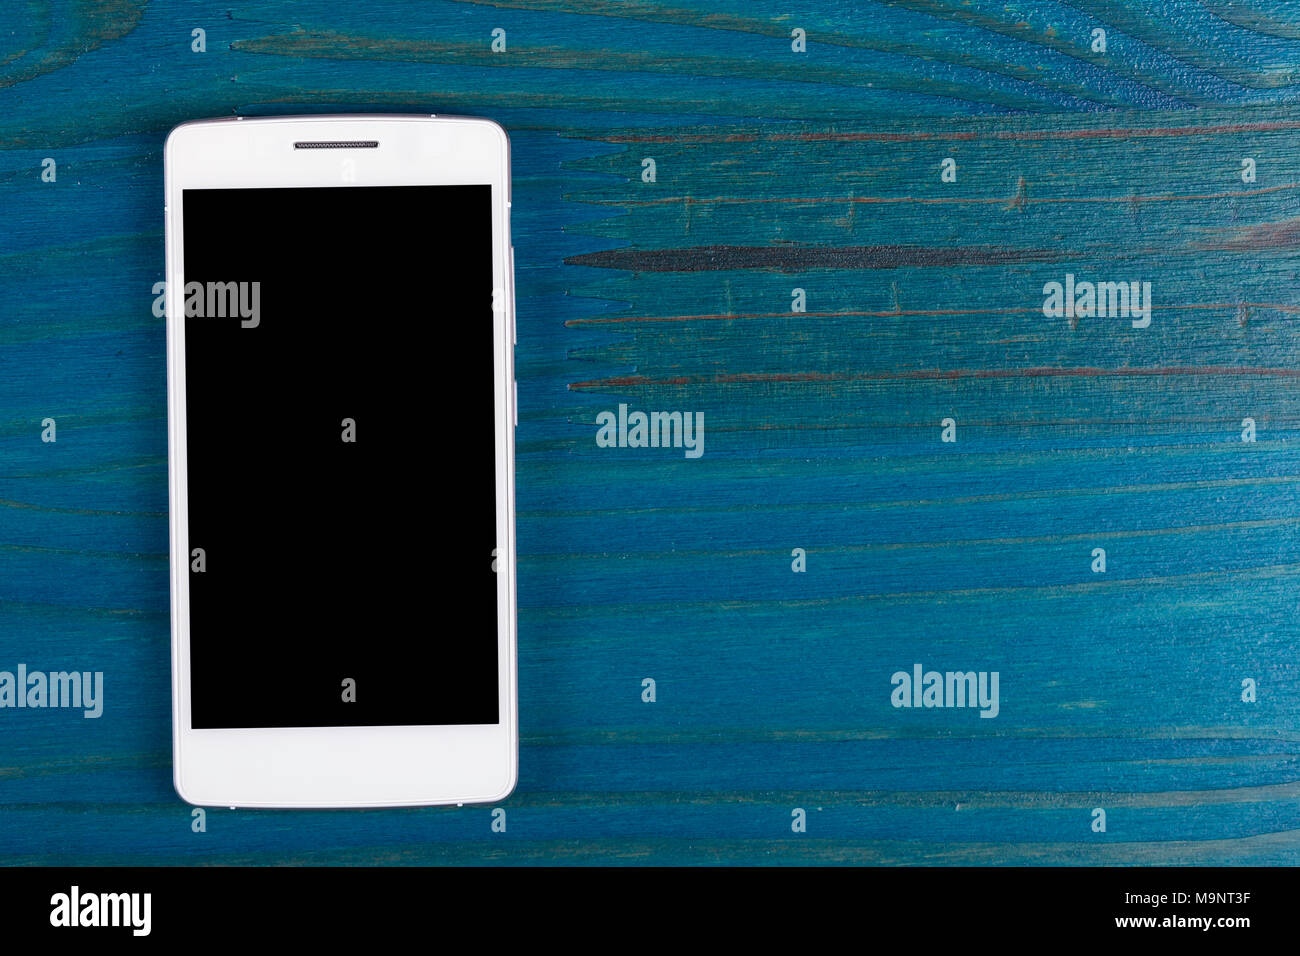 A white smartphone with black screen isolated on wood painted blue. Stock Photo